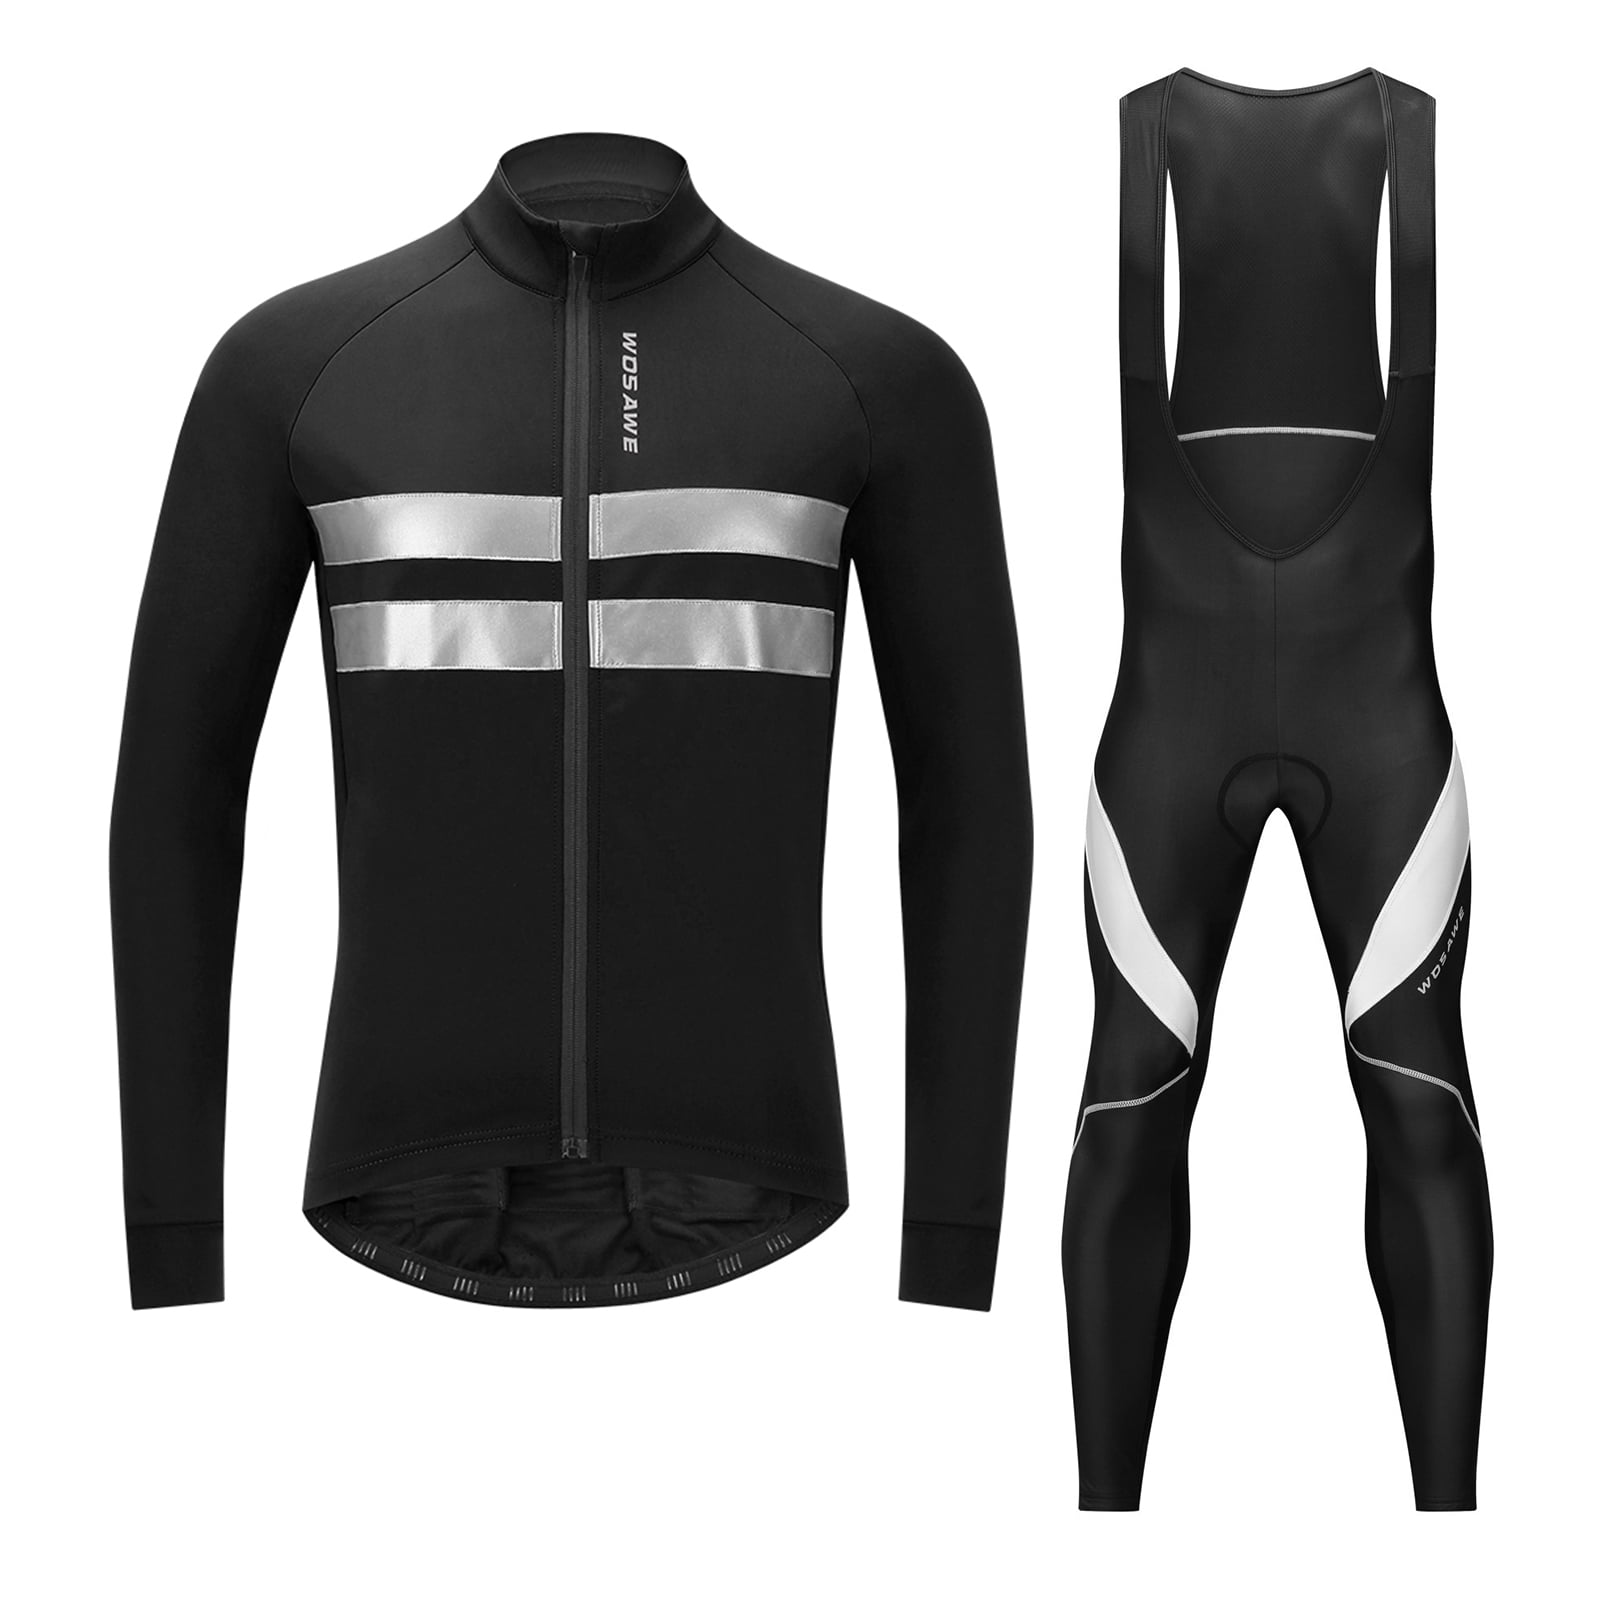 Details about   Men's Cycling Jersey Pants Suit Bicycle Long Sleeve Shirt Bike Padded Tights Set 